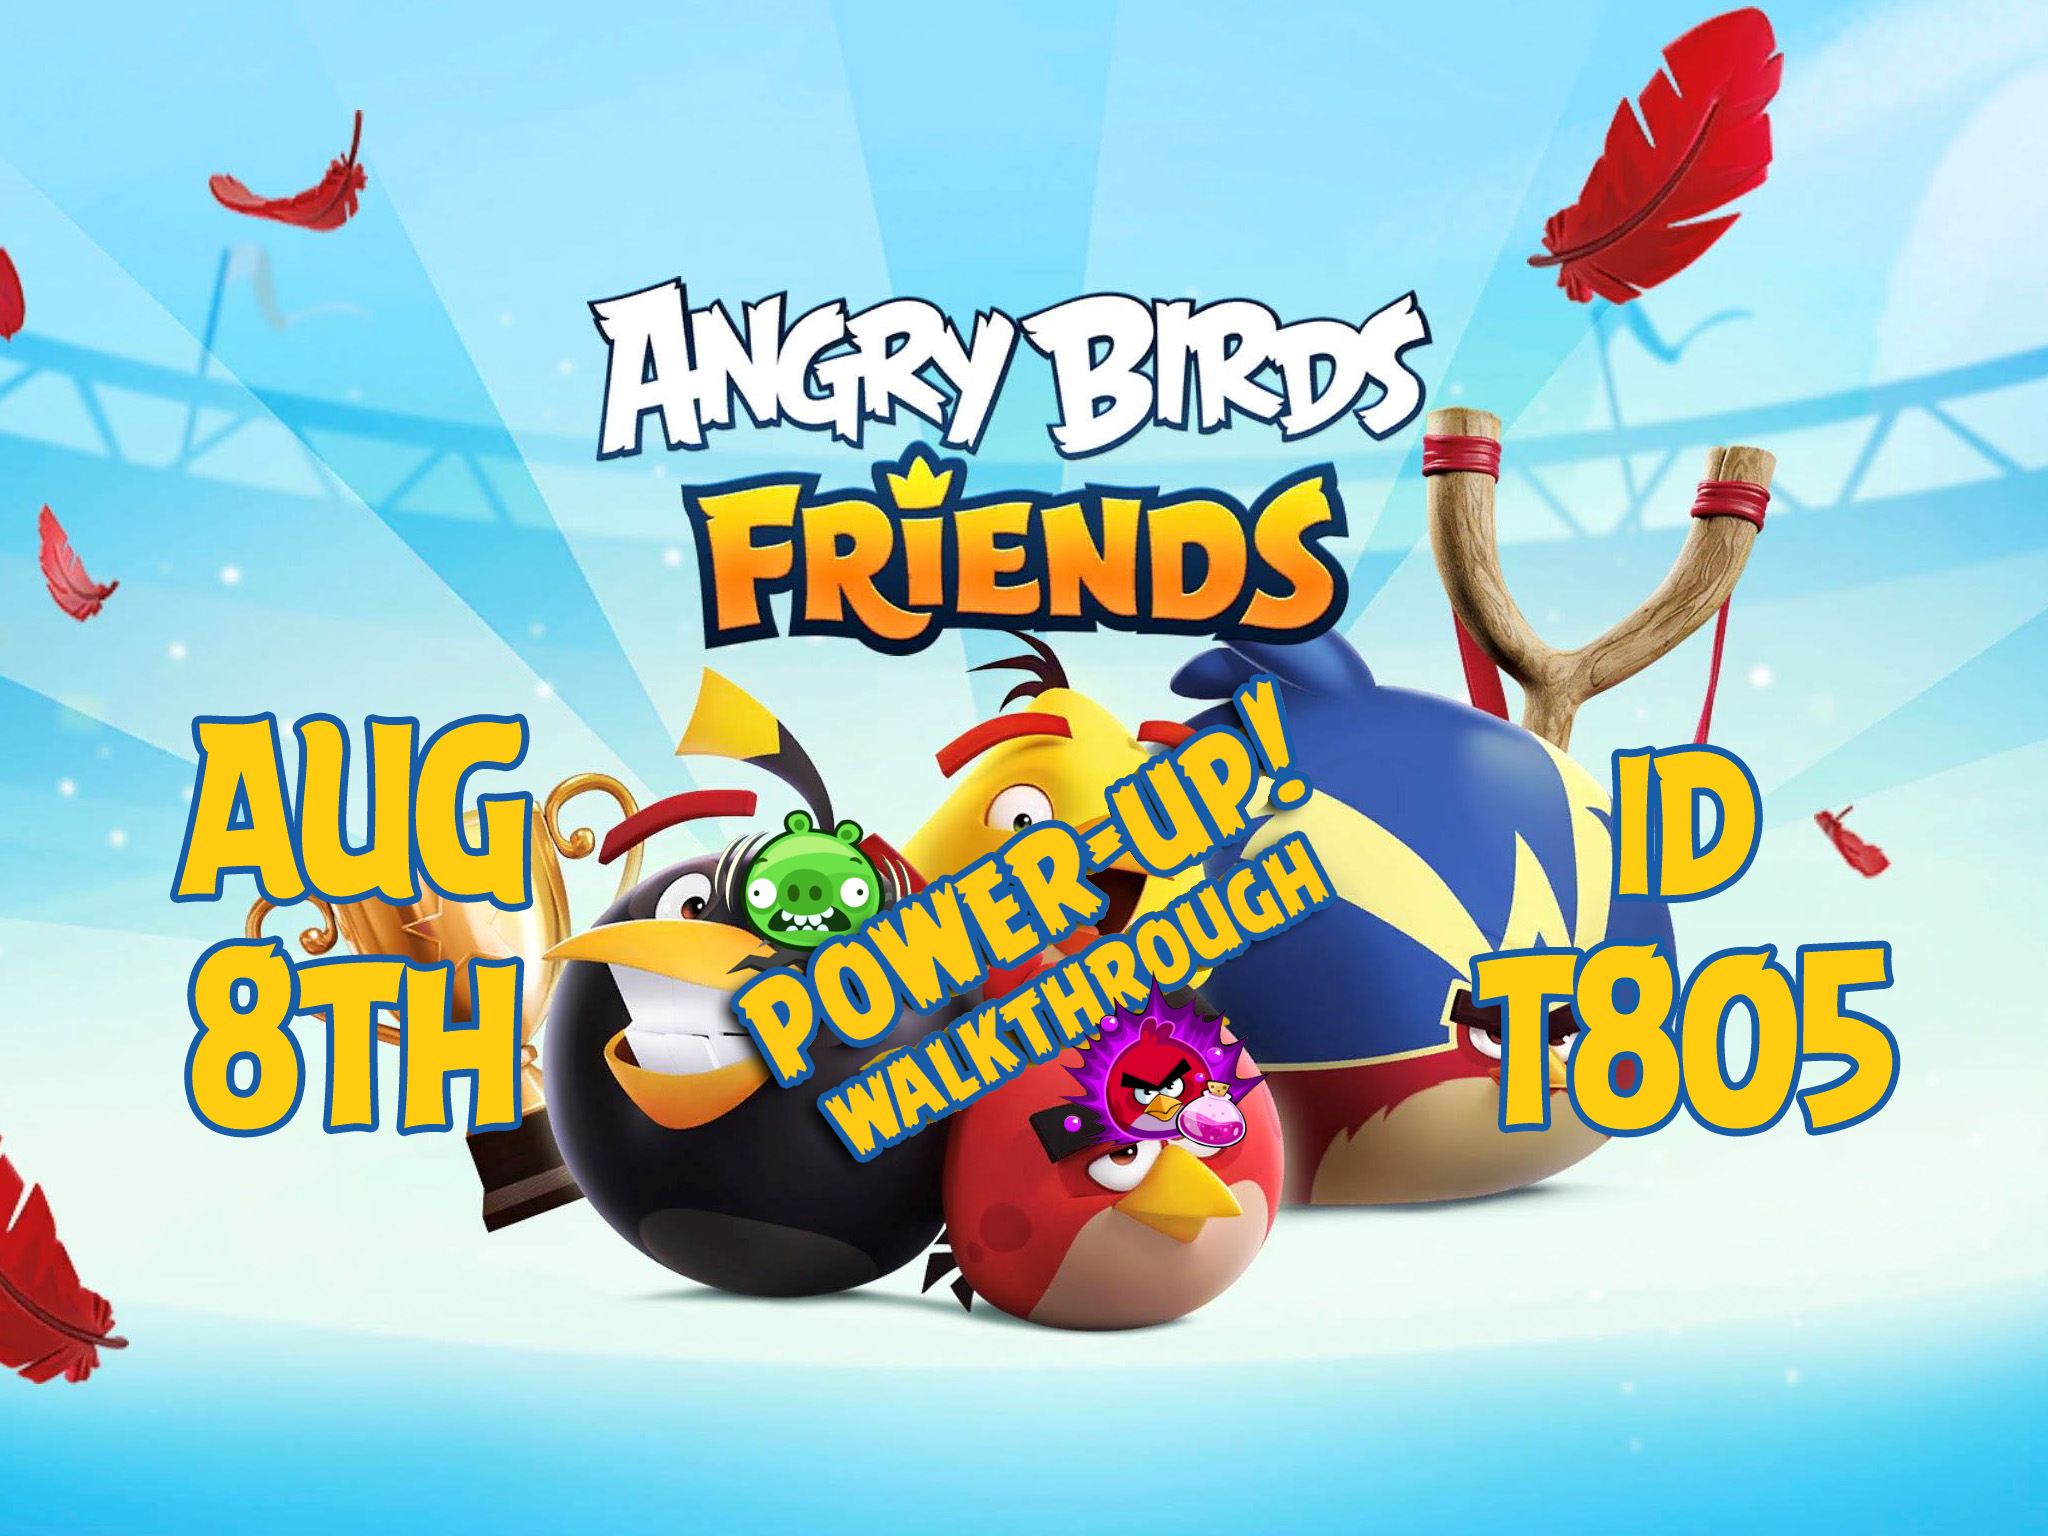 Angry-Birds-Friends-Tournament-T805-Feature-Image-PU